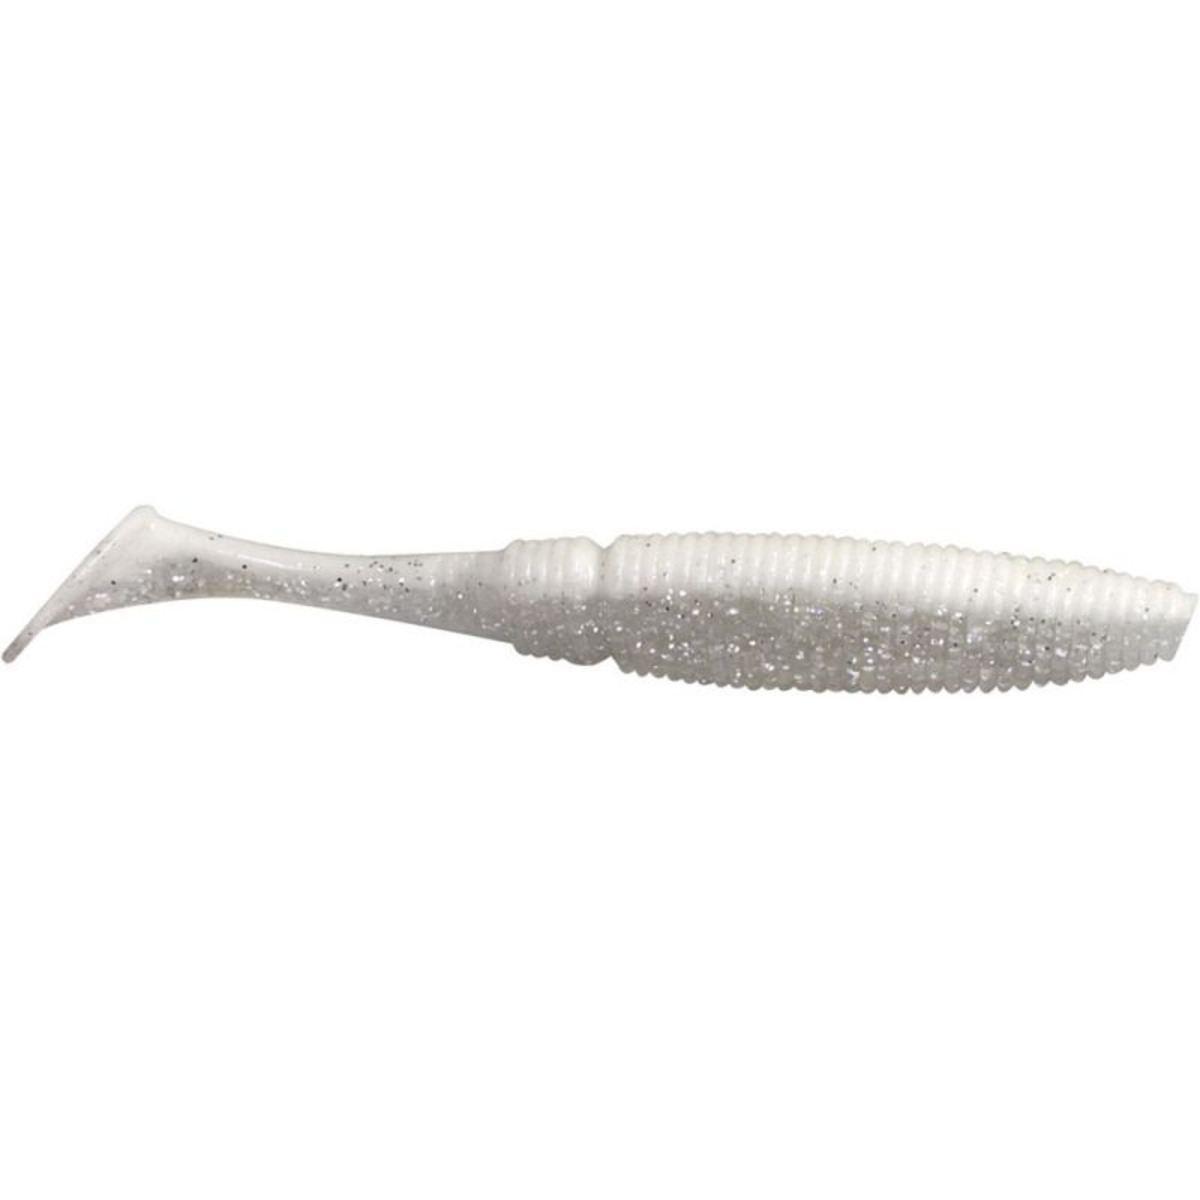 Rapture Power Shad - 13.0 cm - White Ghost